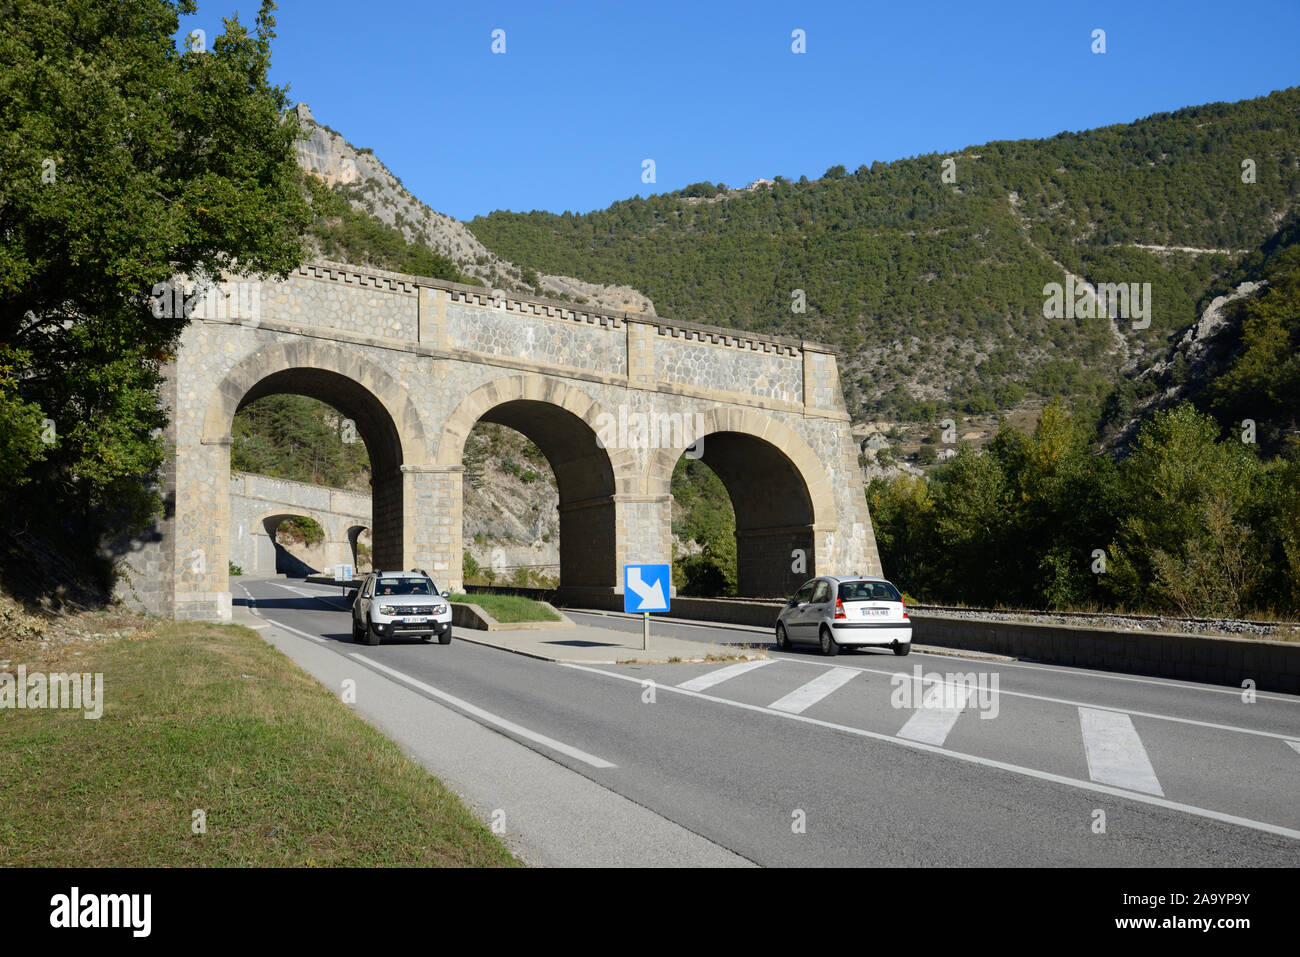 Cars Drive Under a Rock Shed, Water Channel Overbridge or Aqueduct Designed to Channel River Water & Overspill over Road to Prevent Flooding France Stock Photo